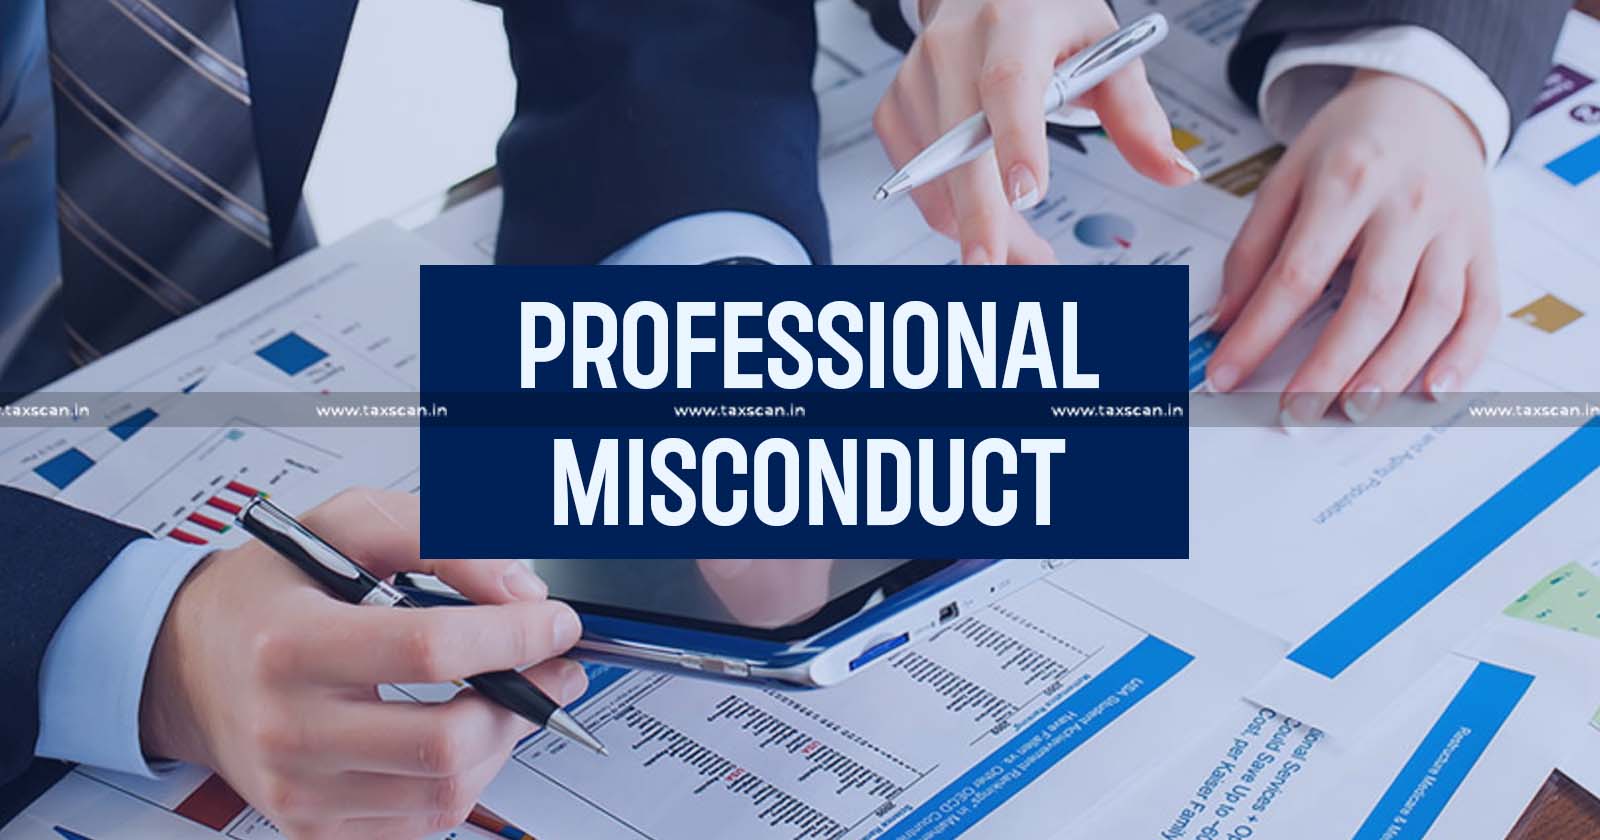 Chartered Accountants - CA Misconduct - Professional Misconduct - CA Employed in Govt Organisation - TAXSCAN